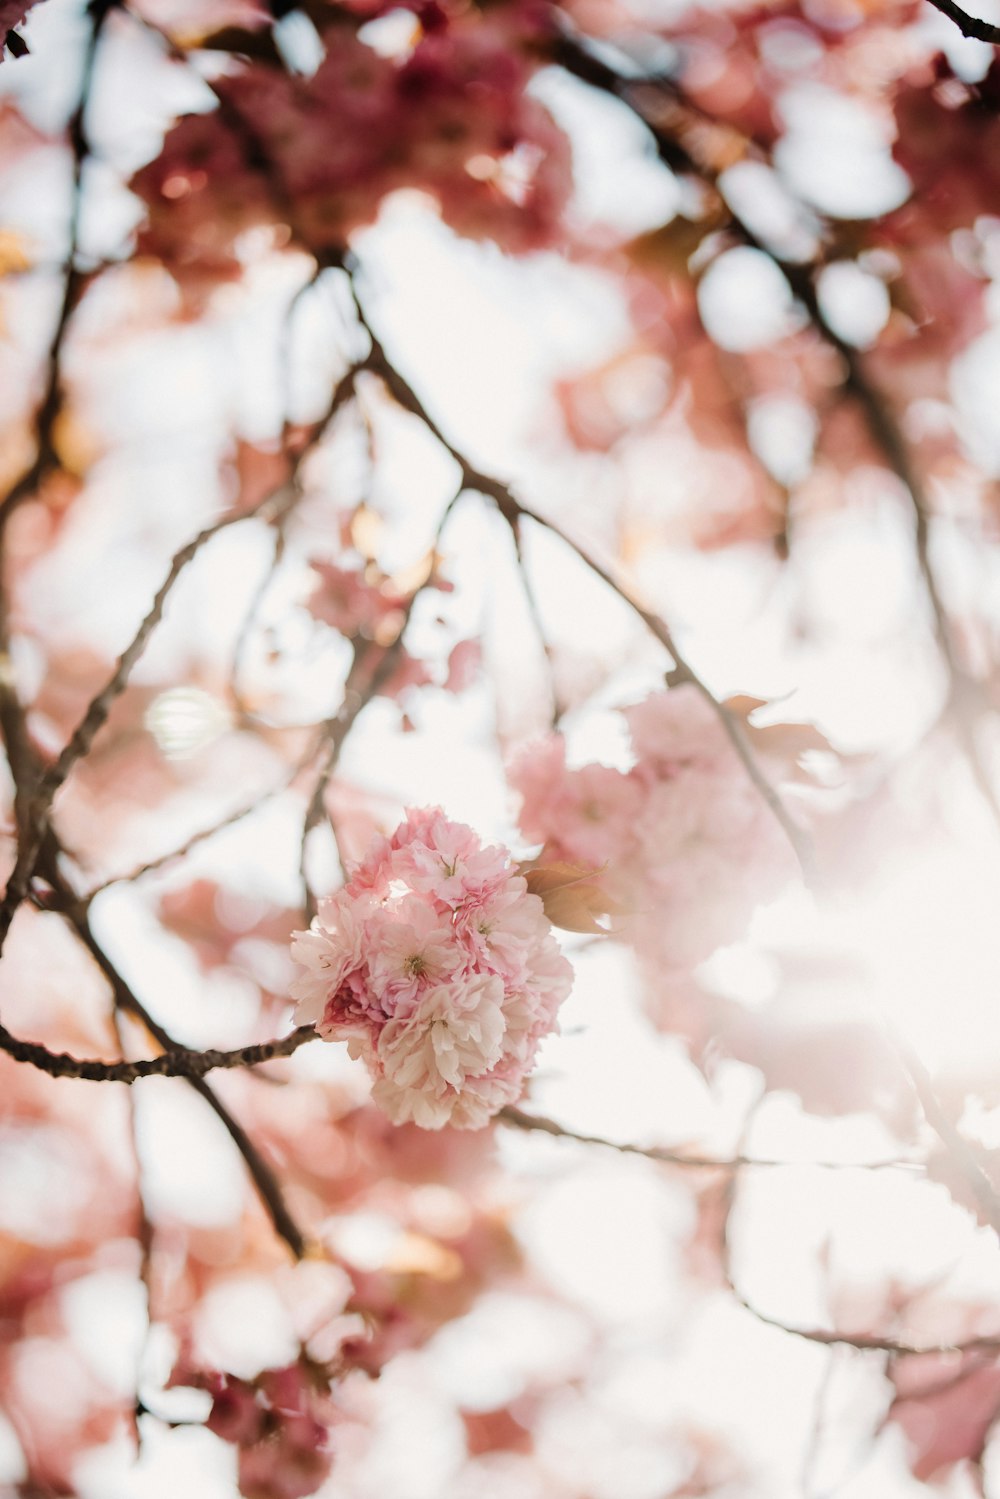 pink cherry blossom in close up photography